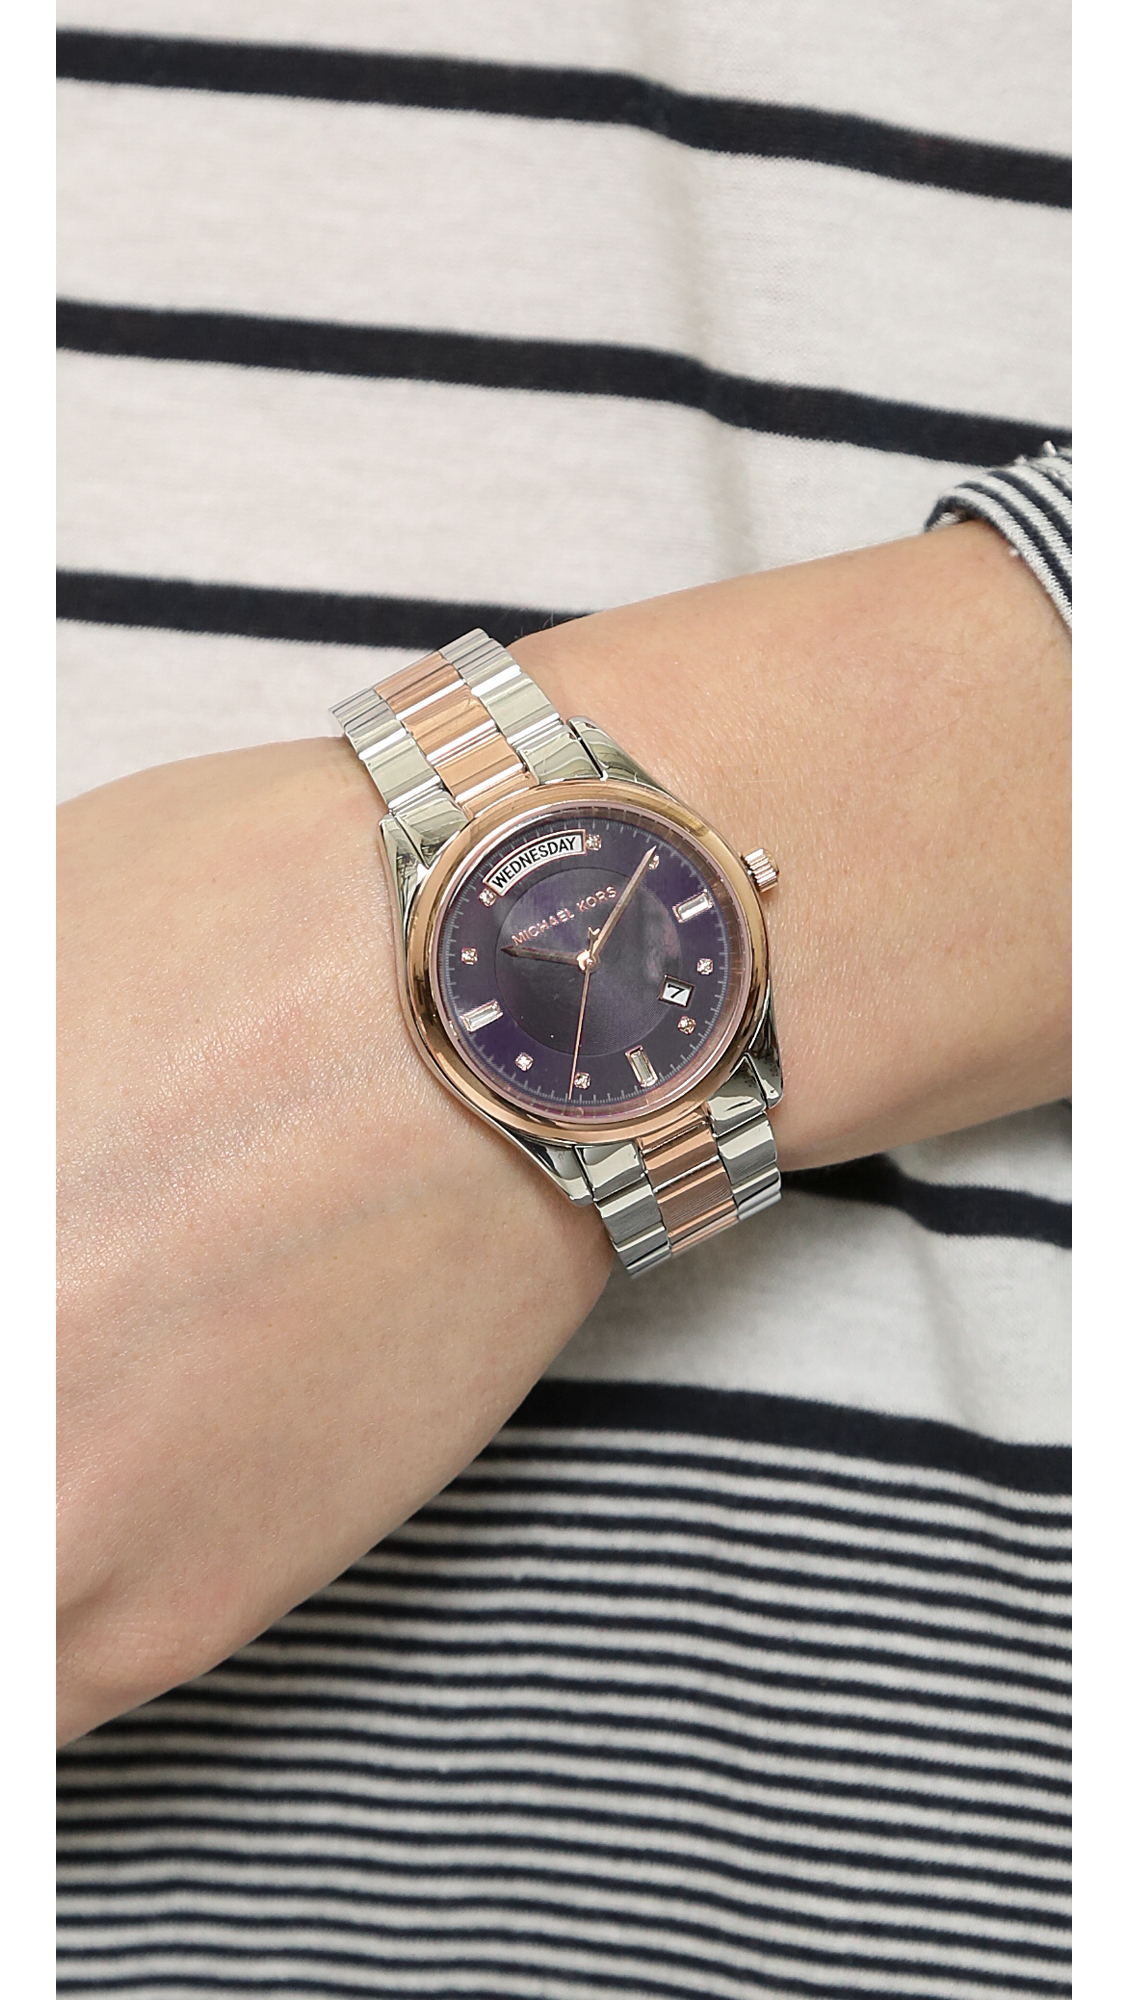 Michael Kors on Twitter Edgy elegance  everyday ease  our Colette watch  the new Fall musthave httptcoeZjLEoUZ7o MKTimeless  httptcohlgVLQHch5  Twitter